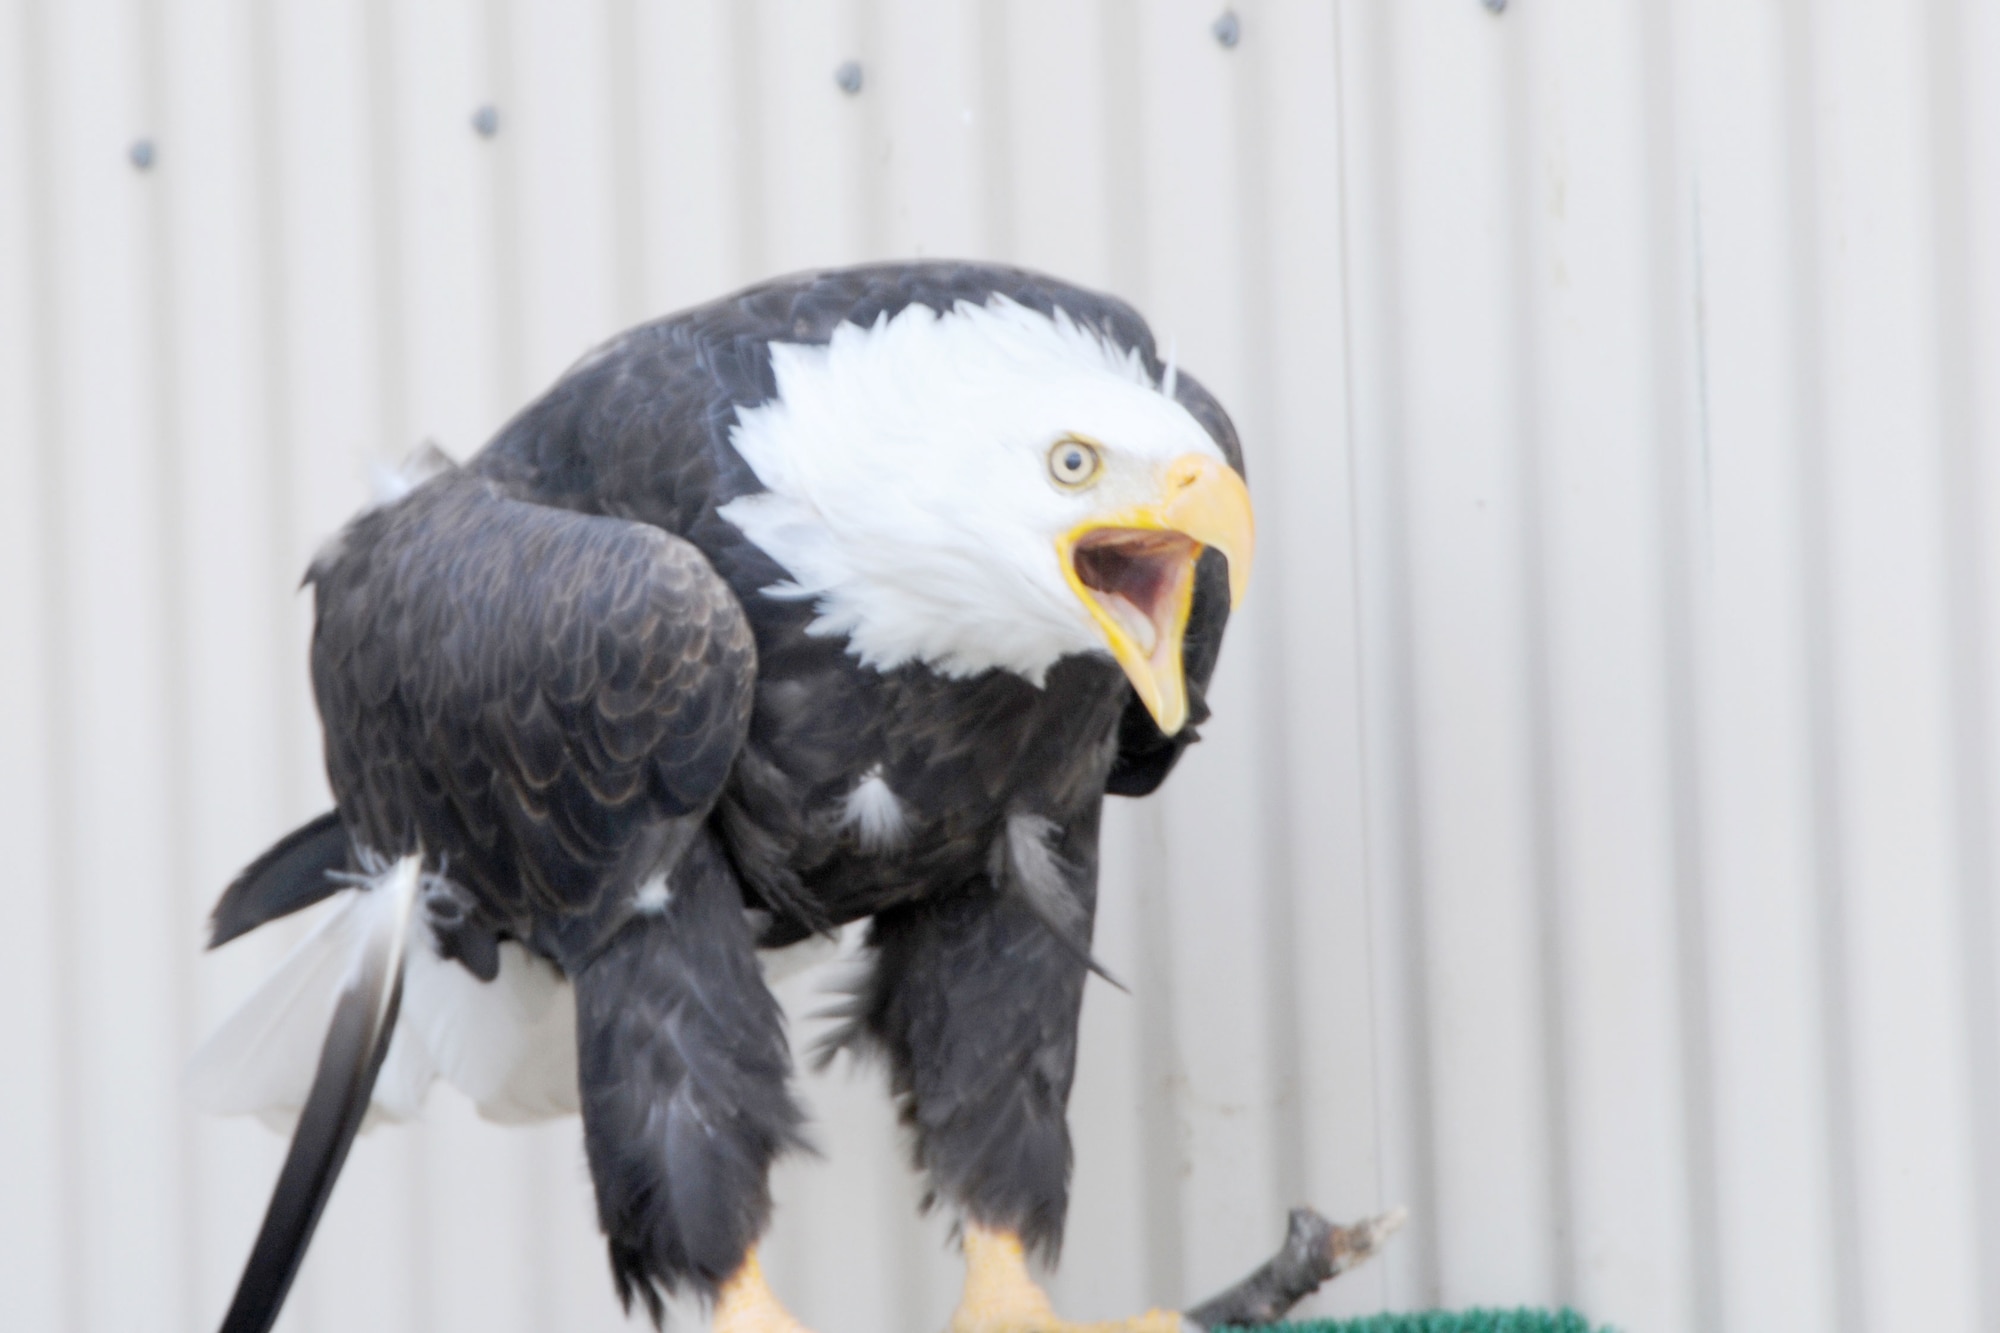 One-Eyed Jack, a disabled bald eagle at the Yukla Memorial on Joint Base Elmendorf-Richardson, chatters at caretaker Tech. Sgt. Brian Lee recently. Two eagles live in the pen, serving as living tributes to wounded veterans. (U.S. Air Force photo\Chris McCann)